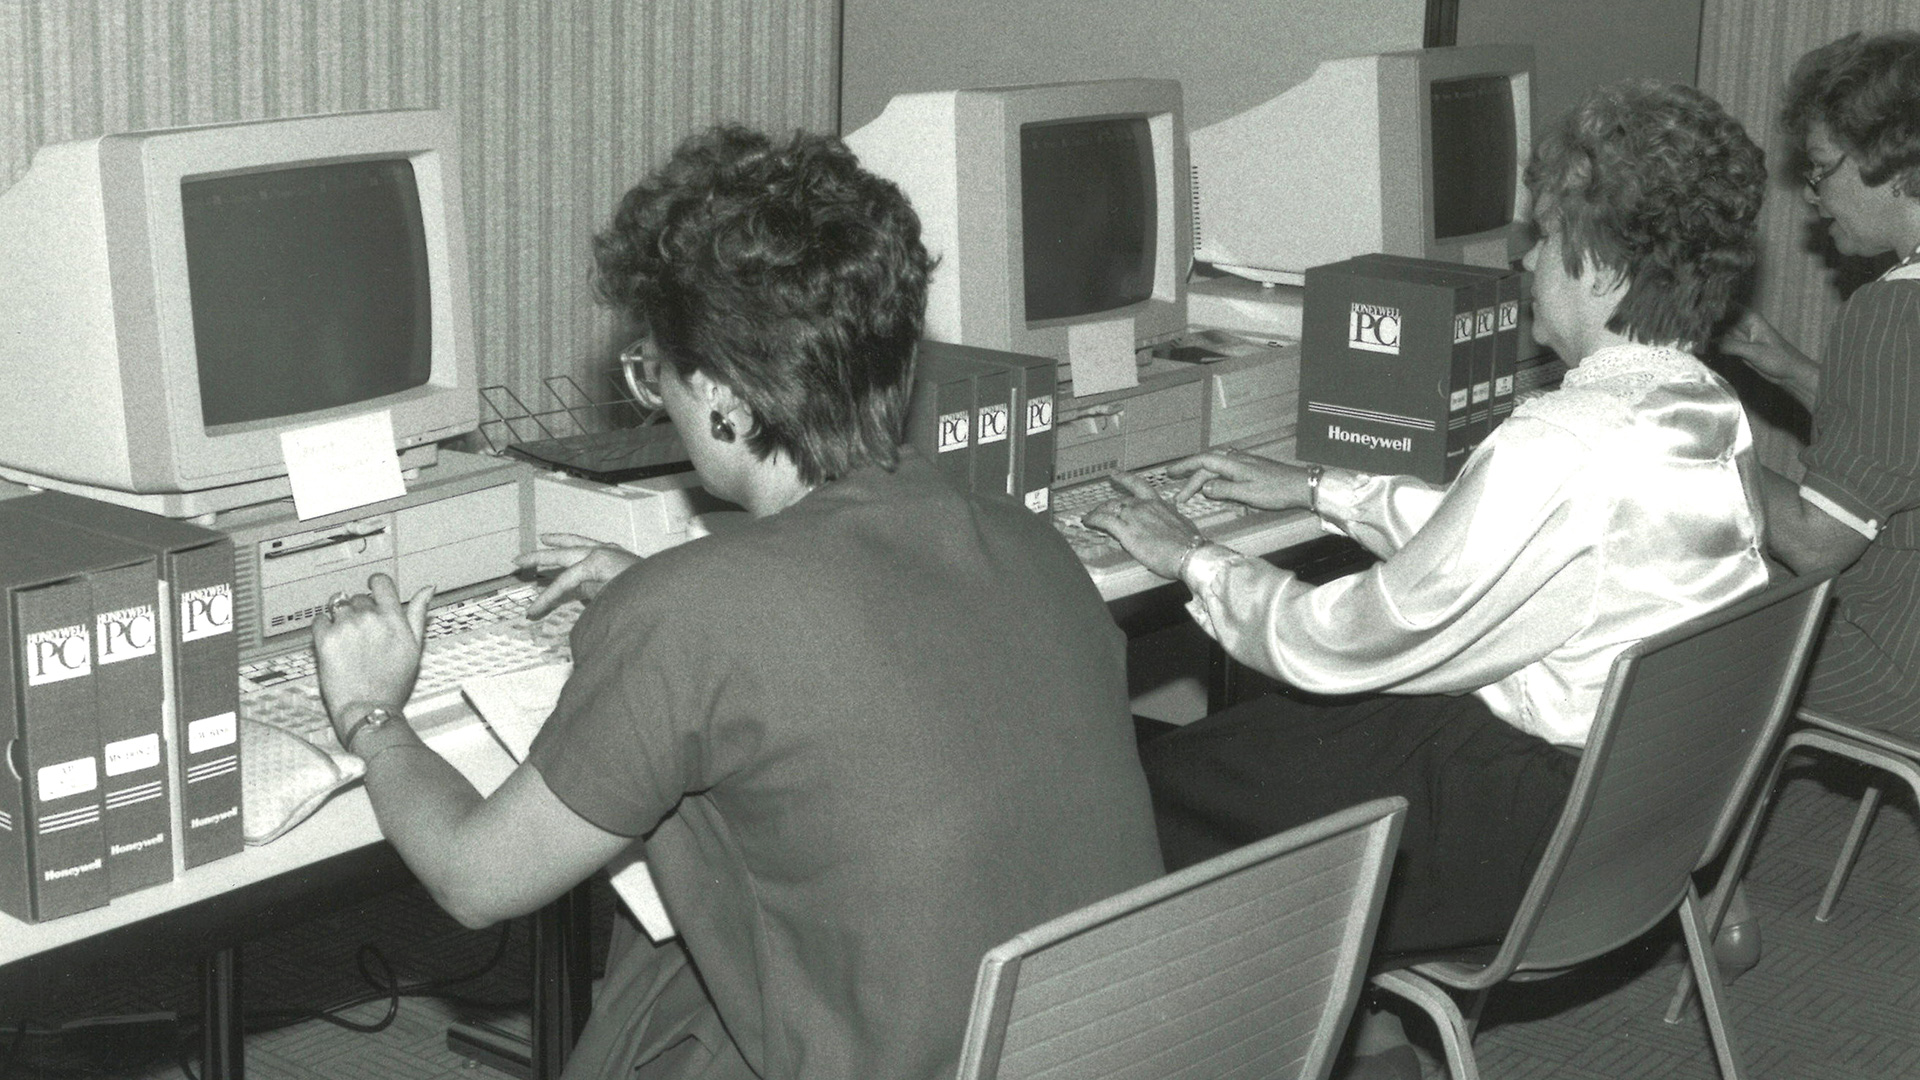 STRS Ohio technology in 1986